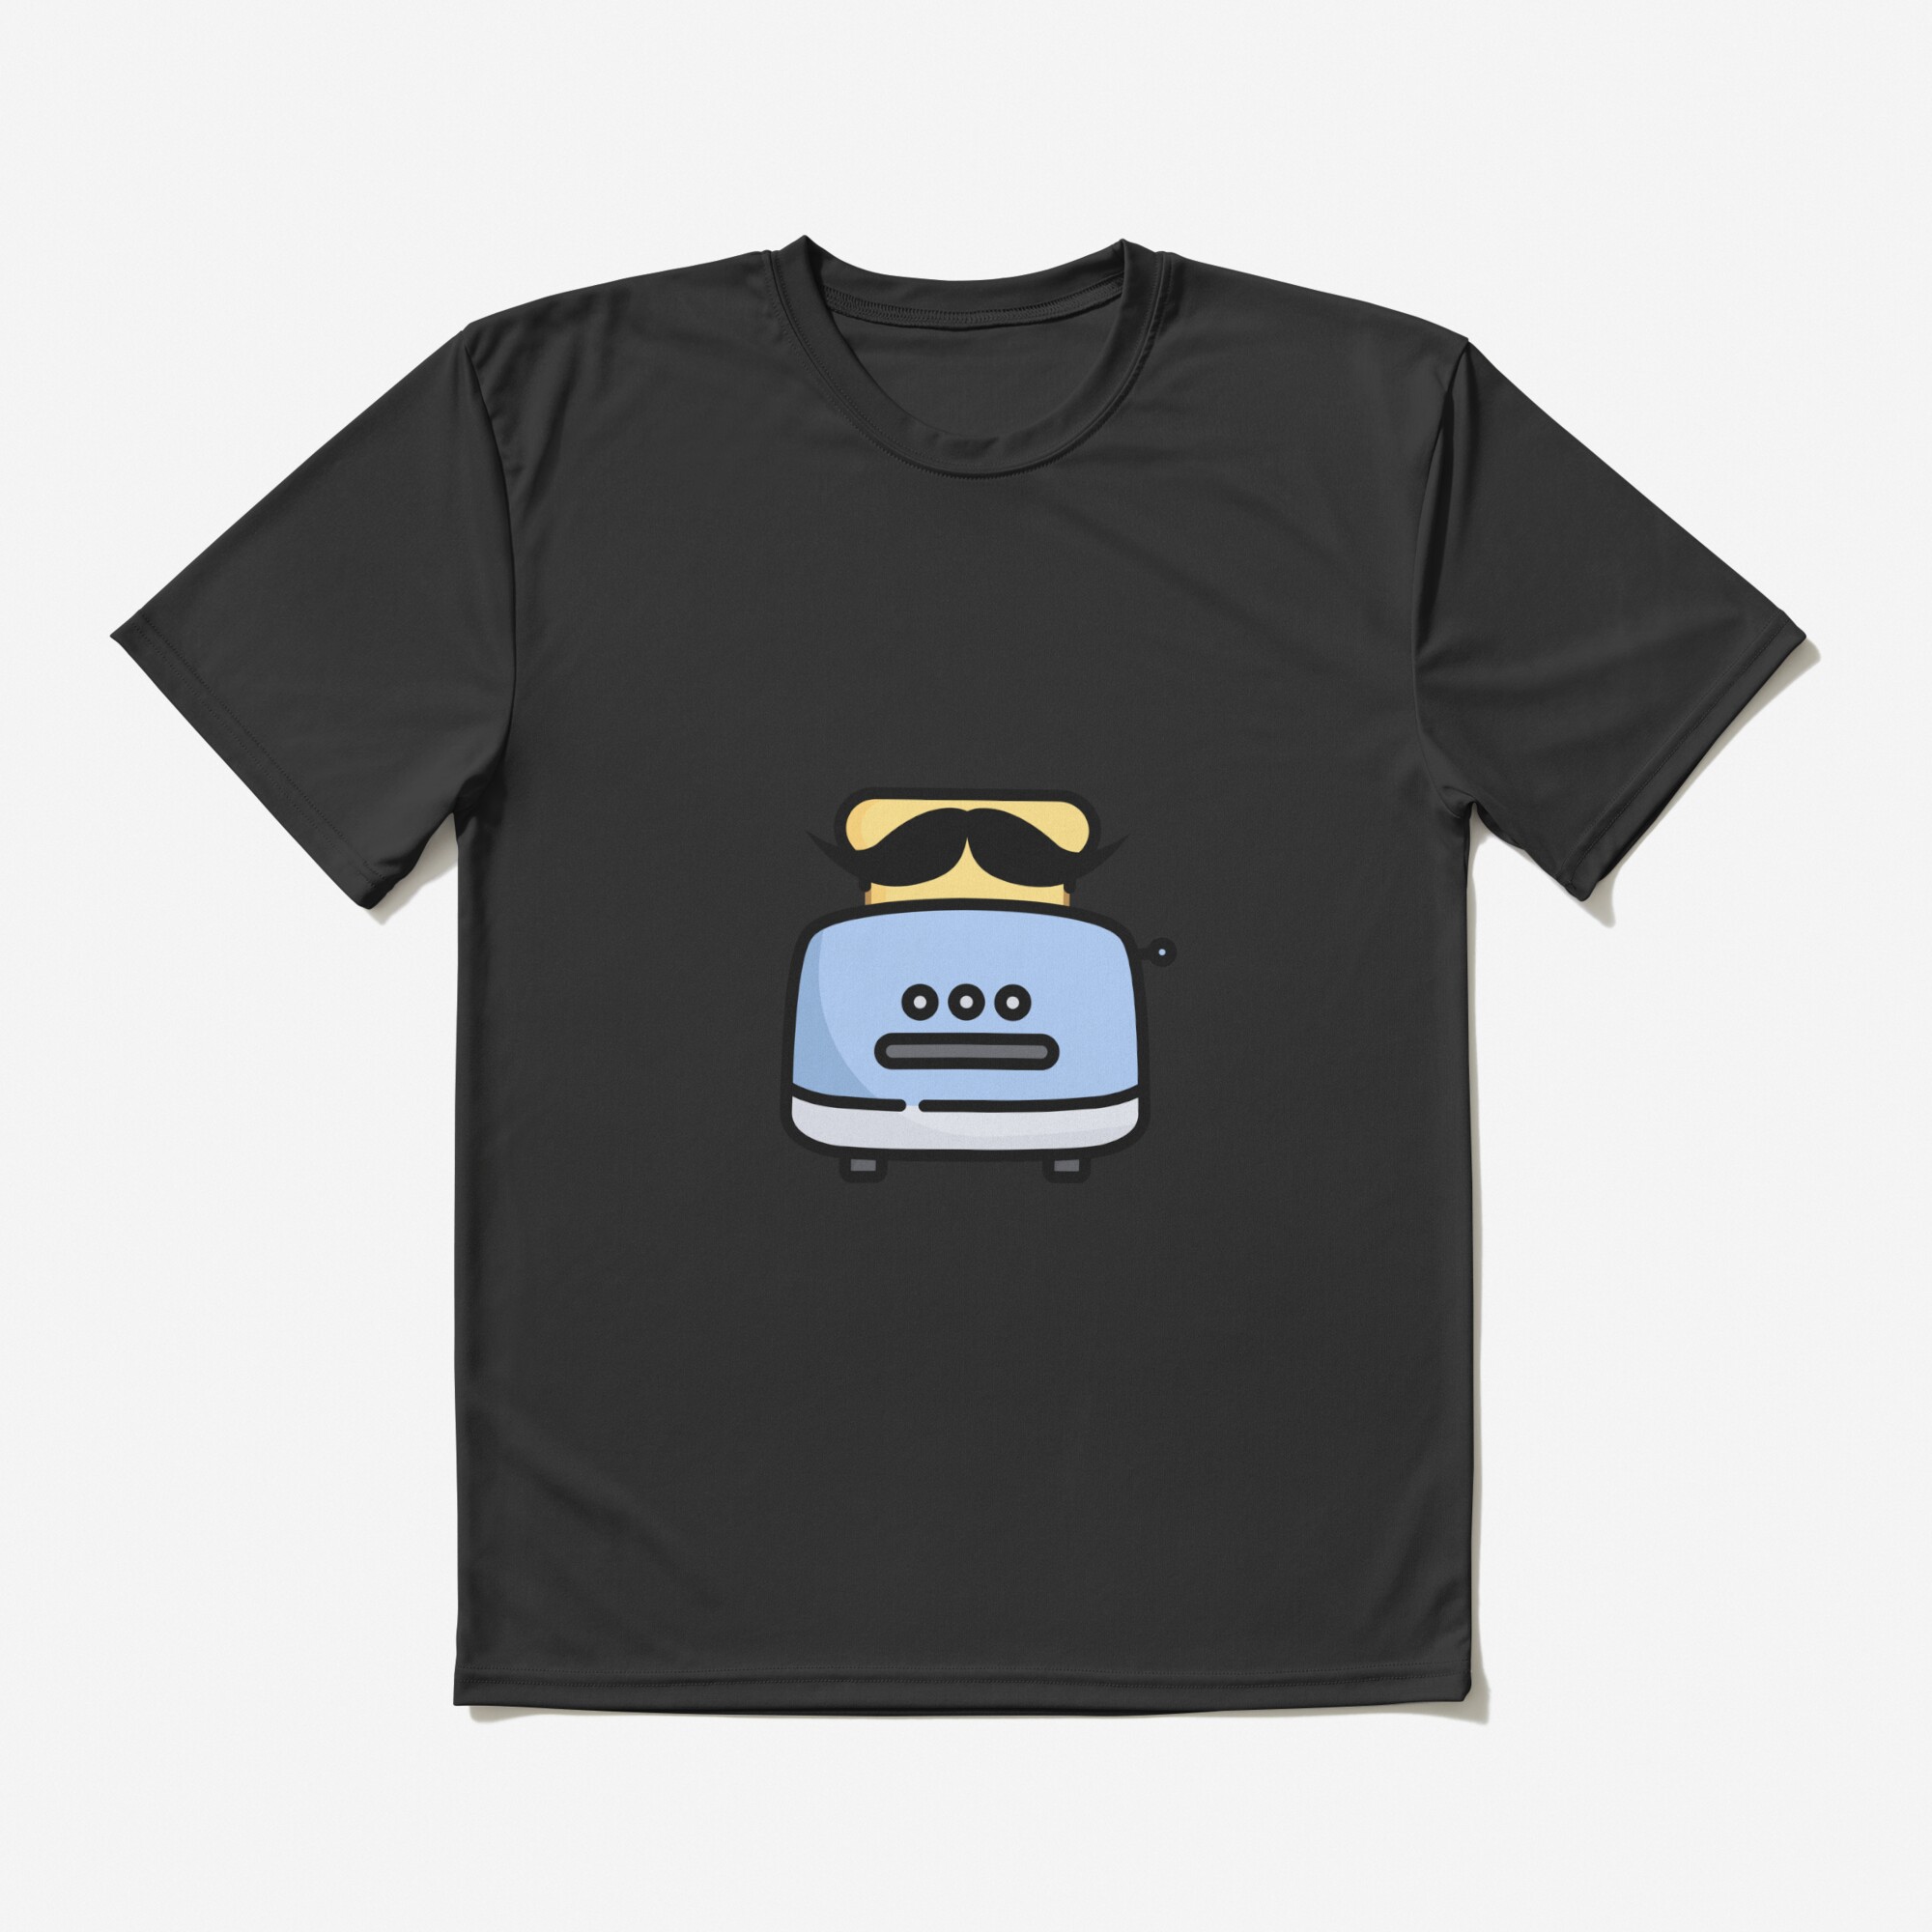 ssrcoactive tshirtflatlay10101001c5ca27c6frontsquare2000x2000 7 - Disguised Toast Shop